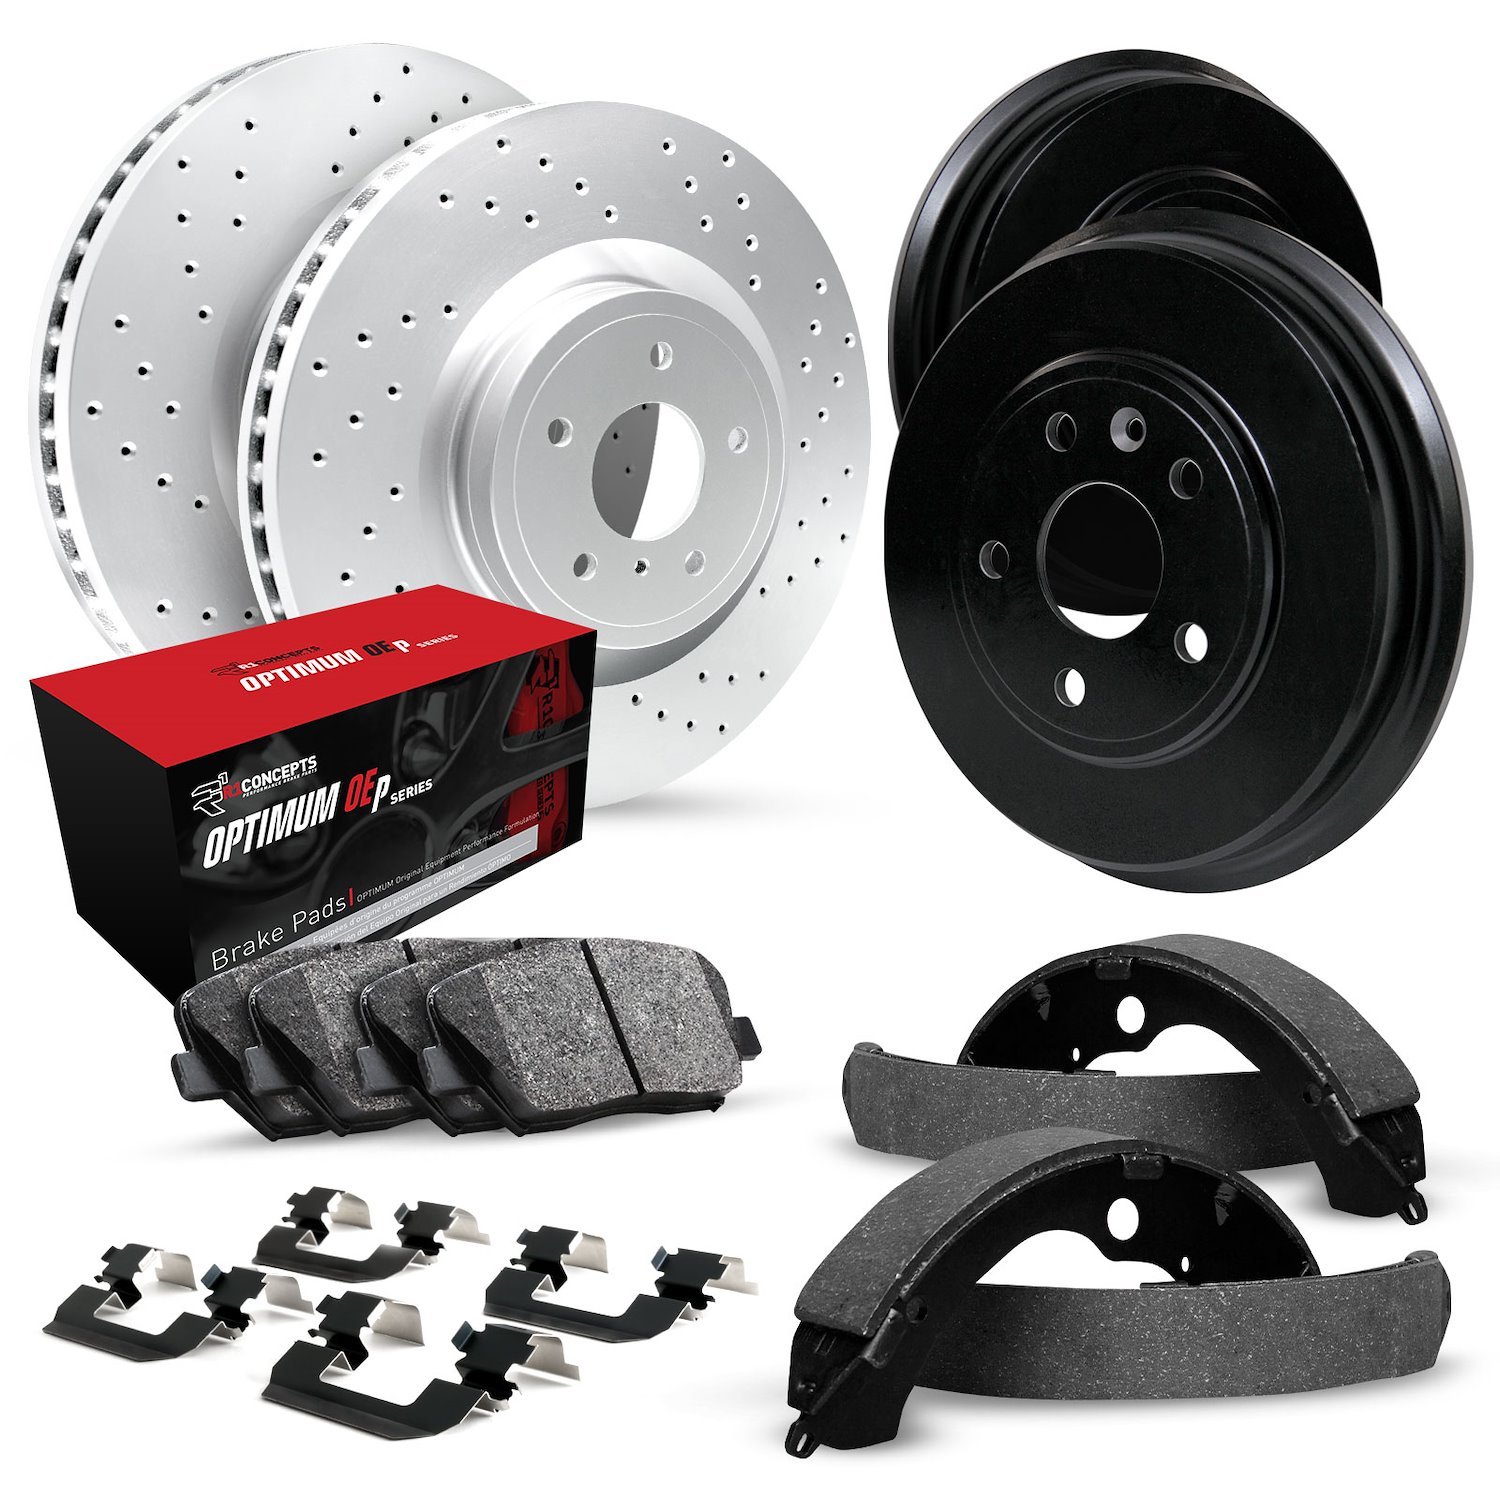 GEO-Carbon Drilled Brake Rotor & Drum Set w/Optimum OE Pads, Shoes, & Hardware, 2005-2008 GM, Position: Front & Rear